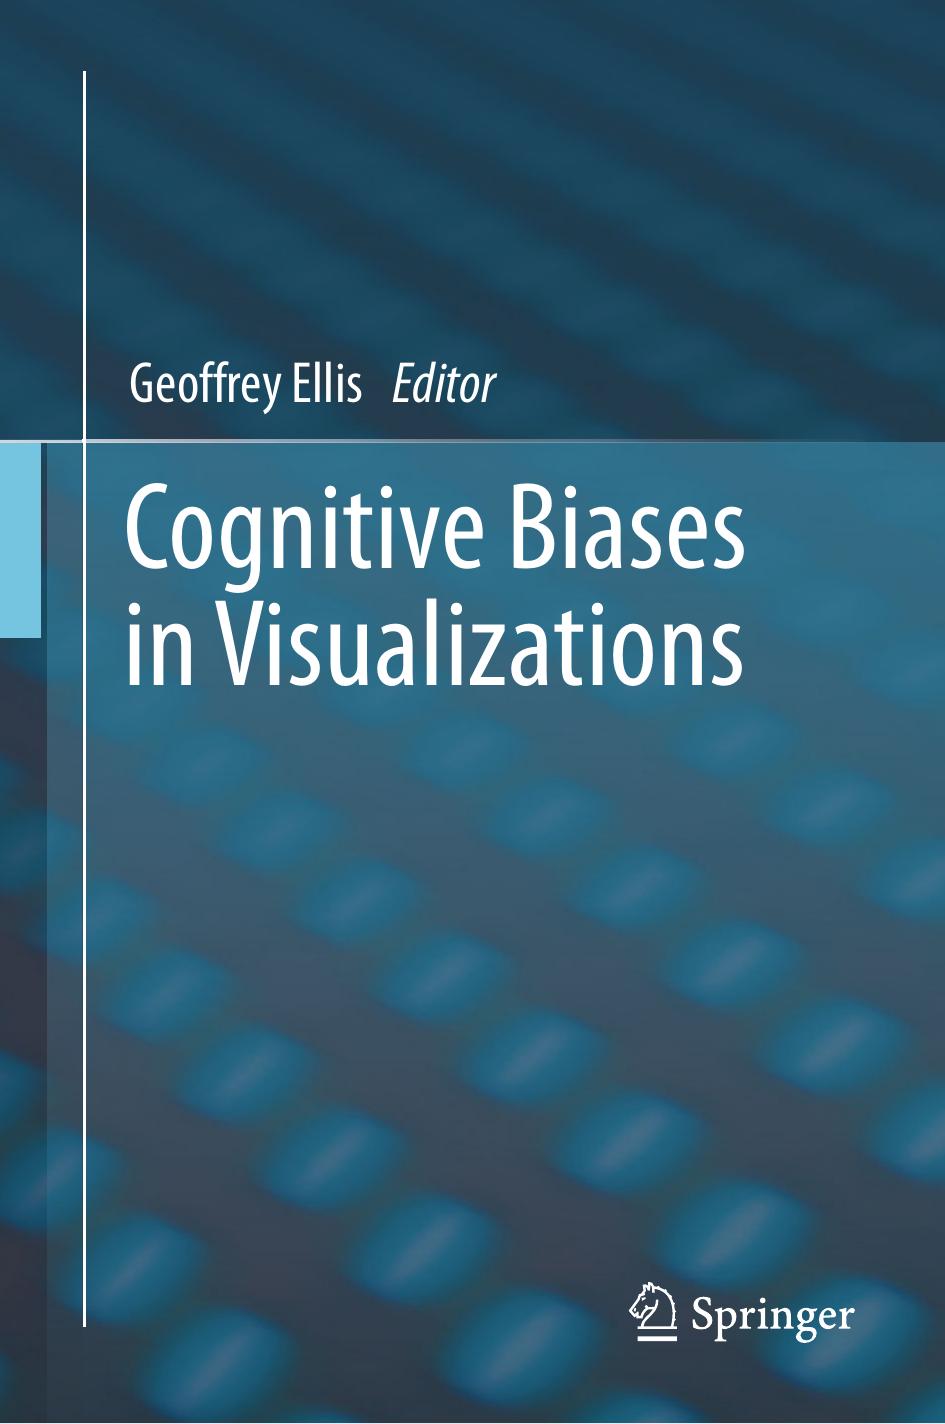 Cognitive Biases in Visualizations by Geoffrey Ellis